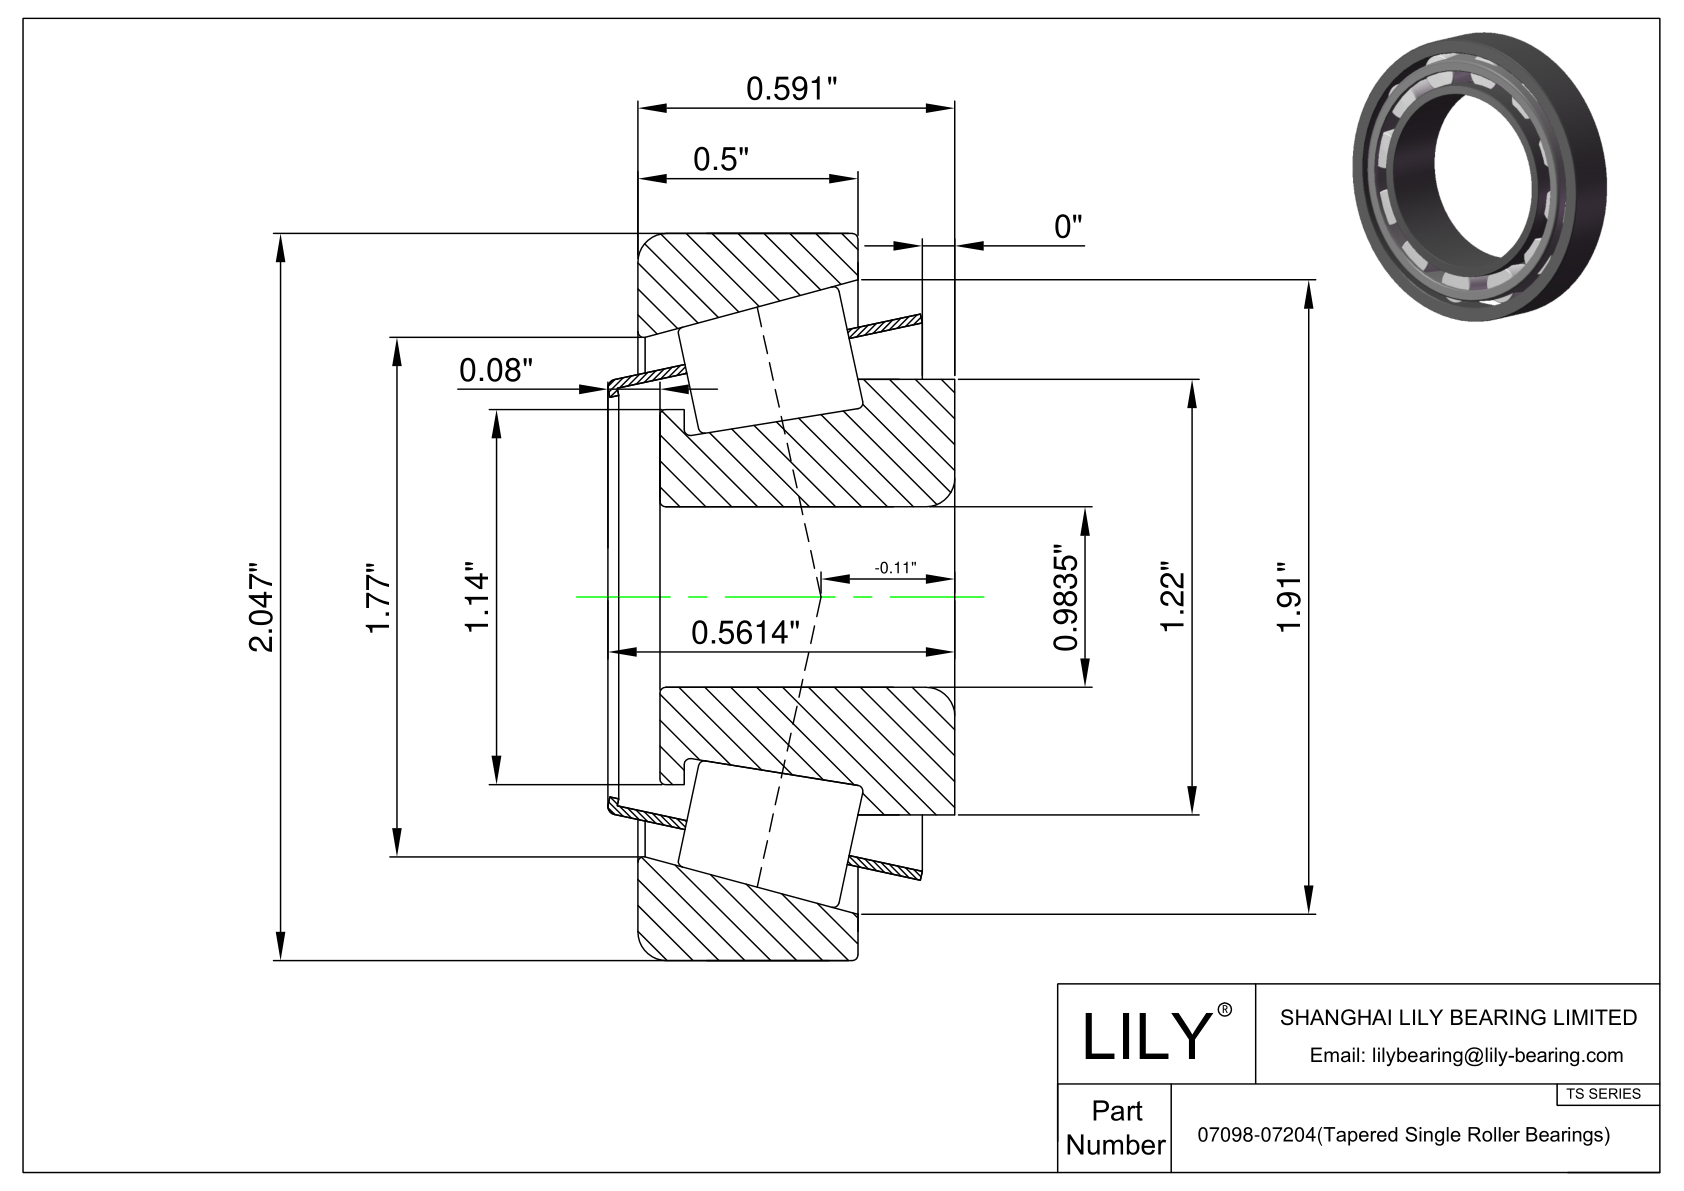 07098-07204 TS (Tapered Single Roller Bearings) (Imperial) cad drawing